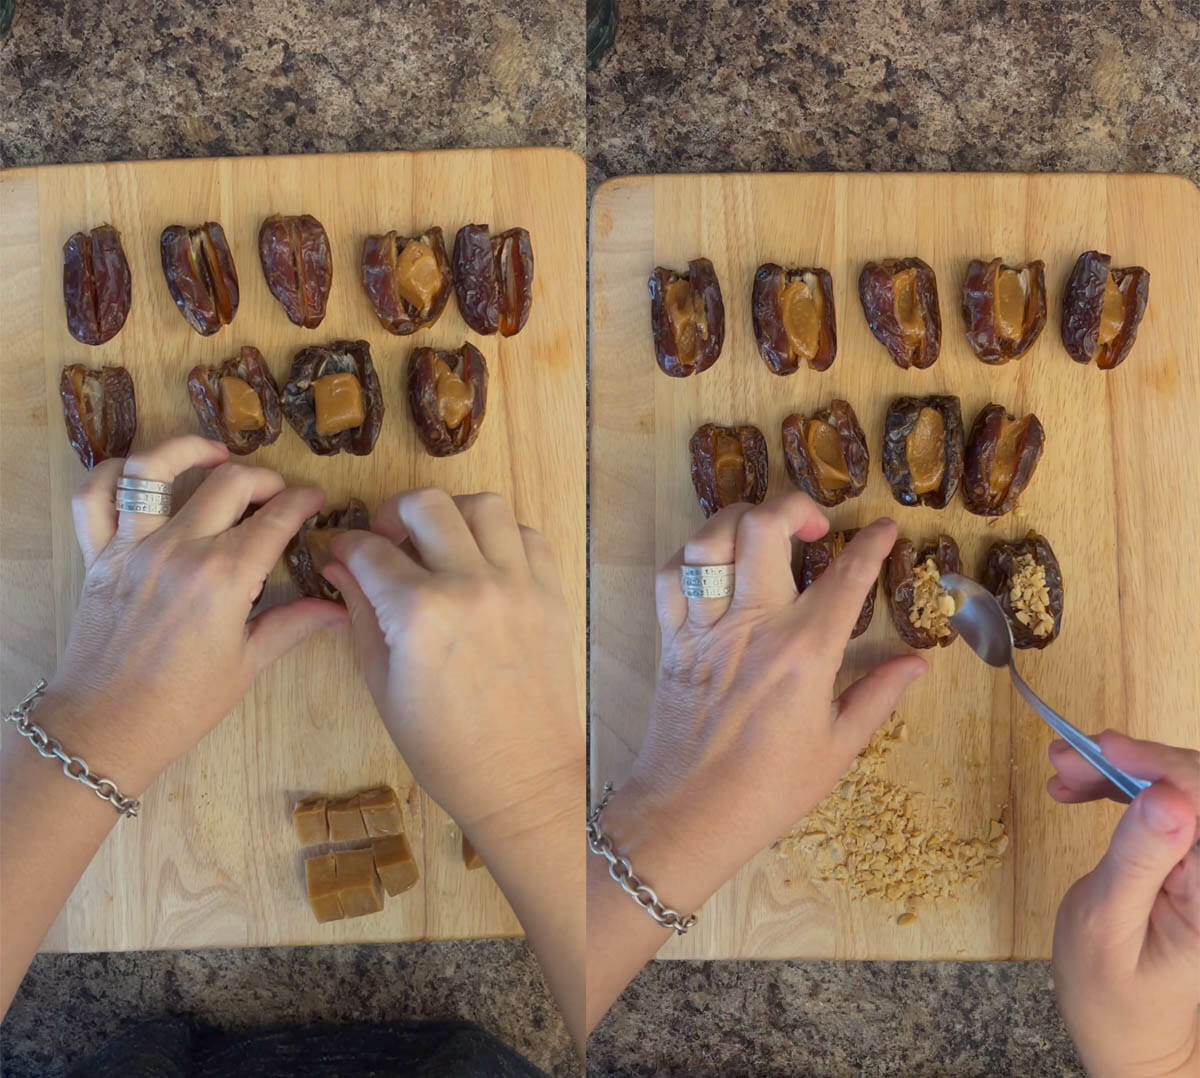 Dates being stuffed with peanut butter mixture and peanuts.